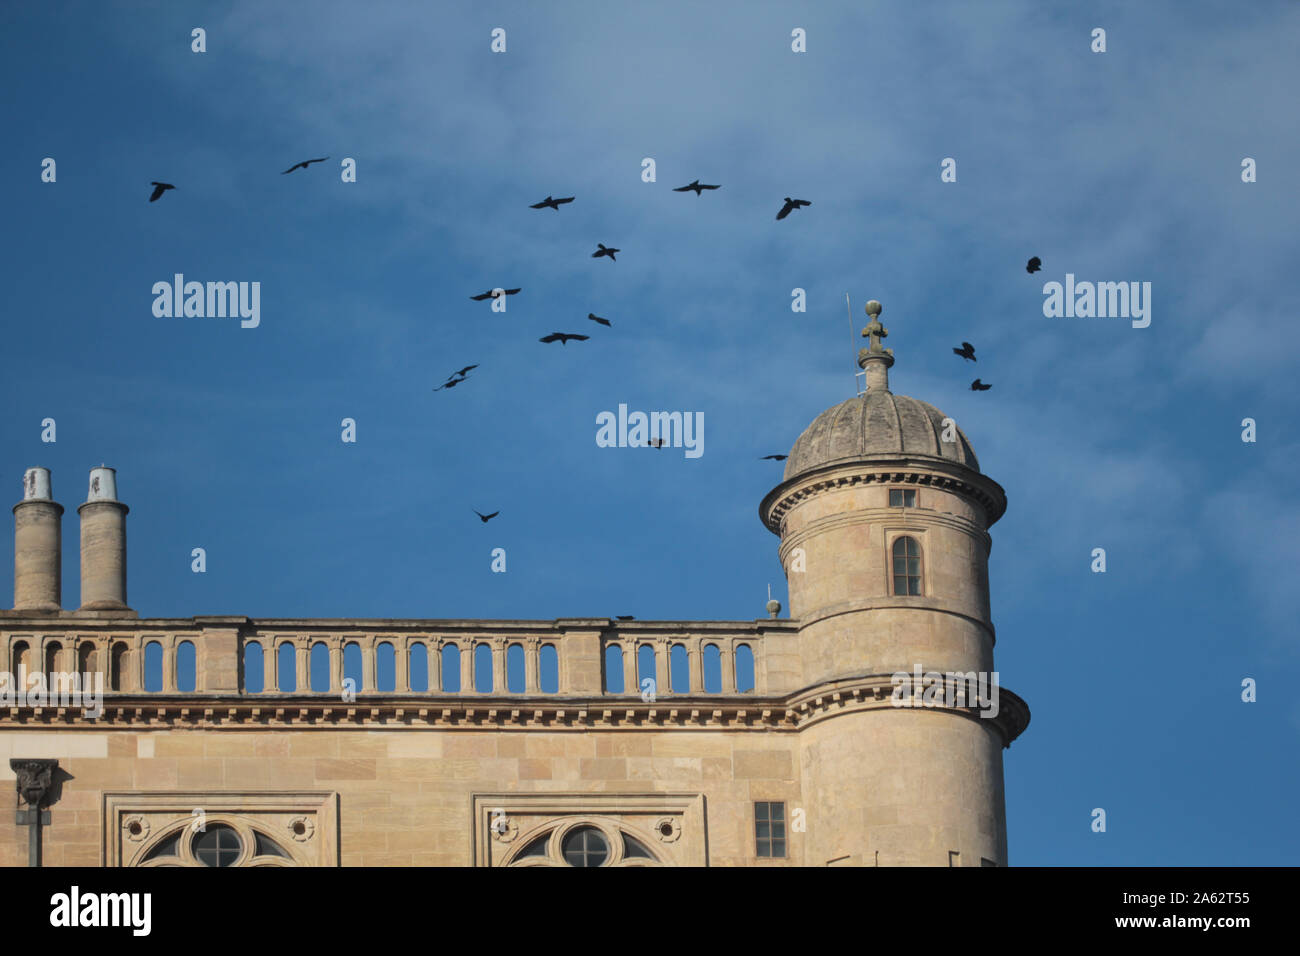 Crows circling the tower of Wollaton Hall in Nottingham Stock Photo